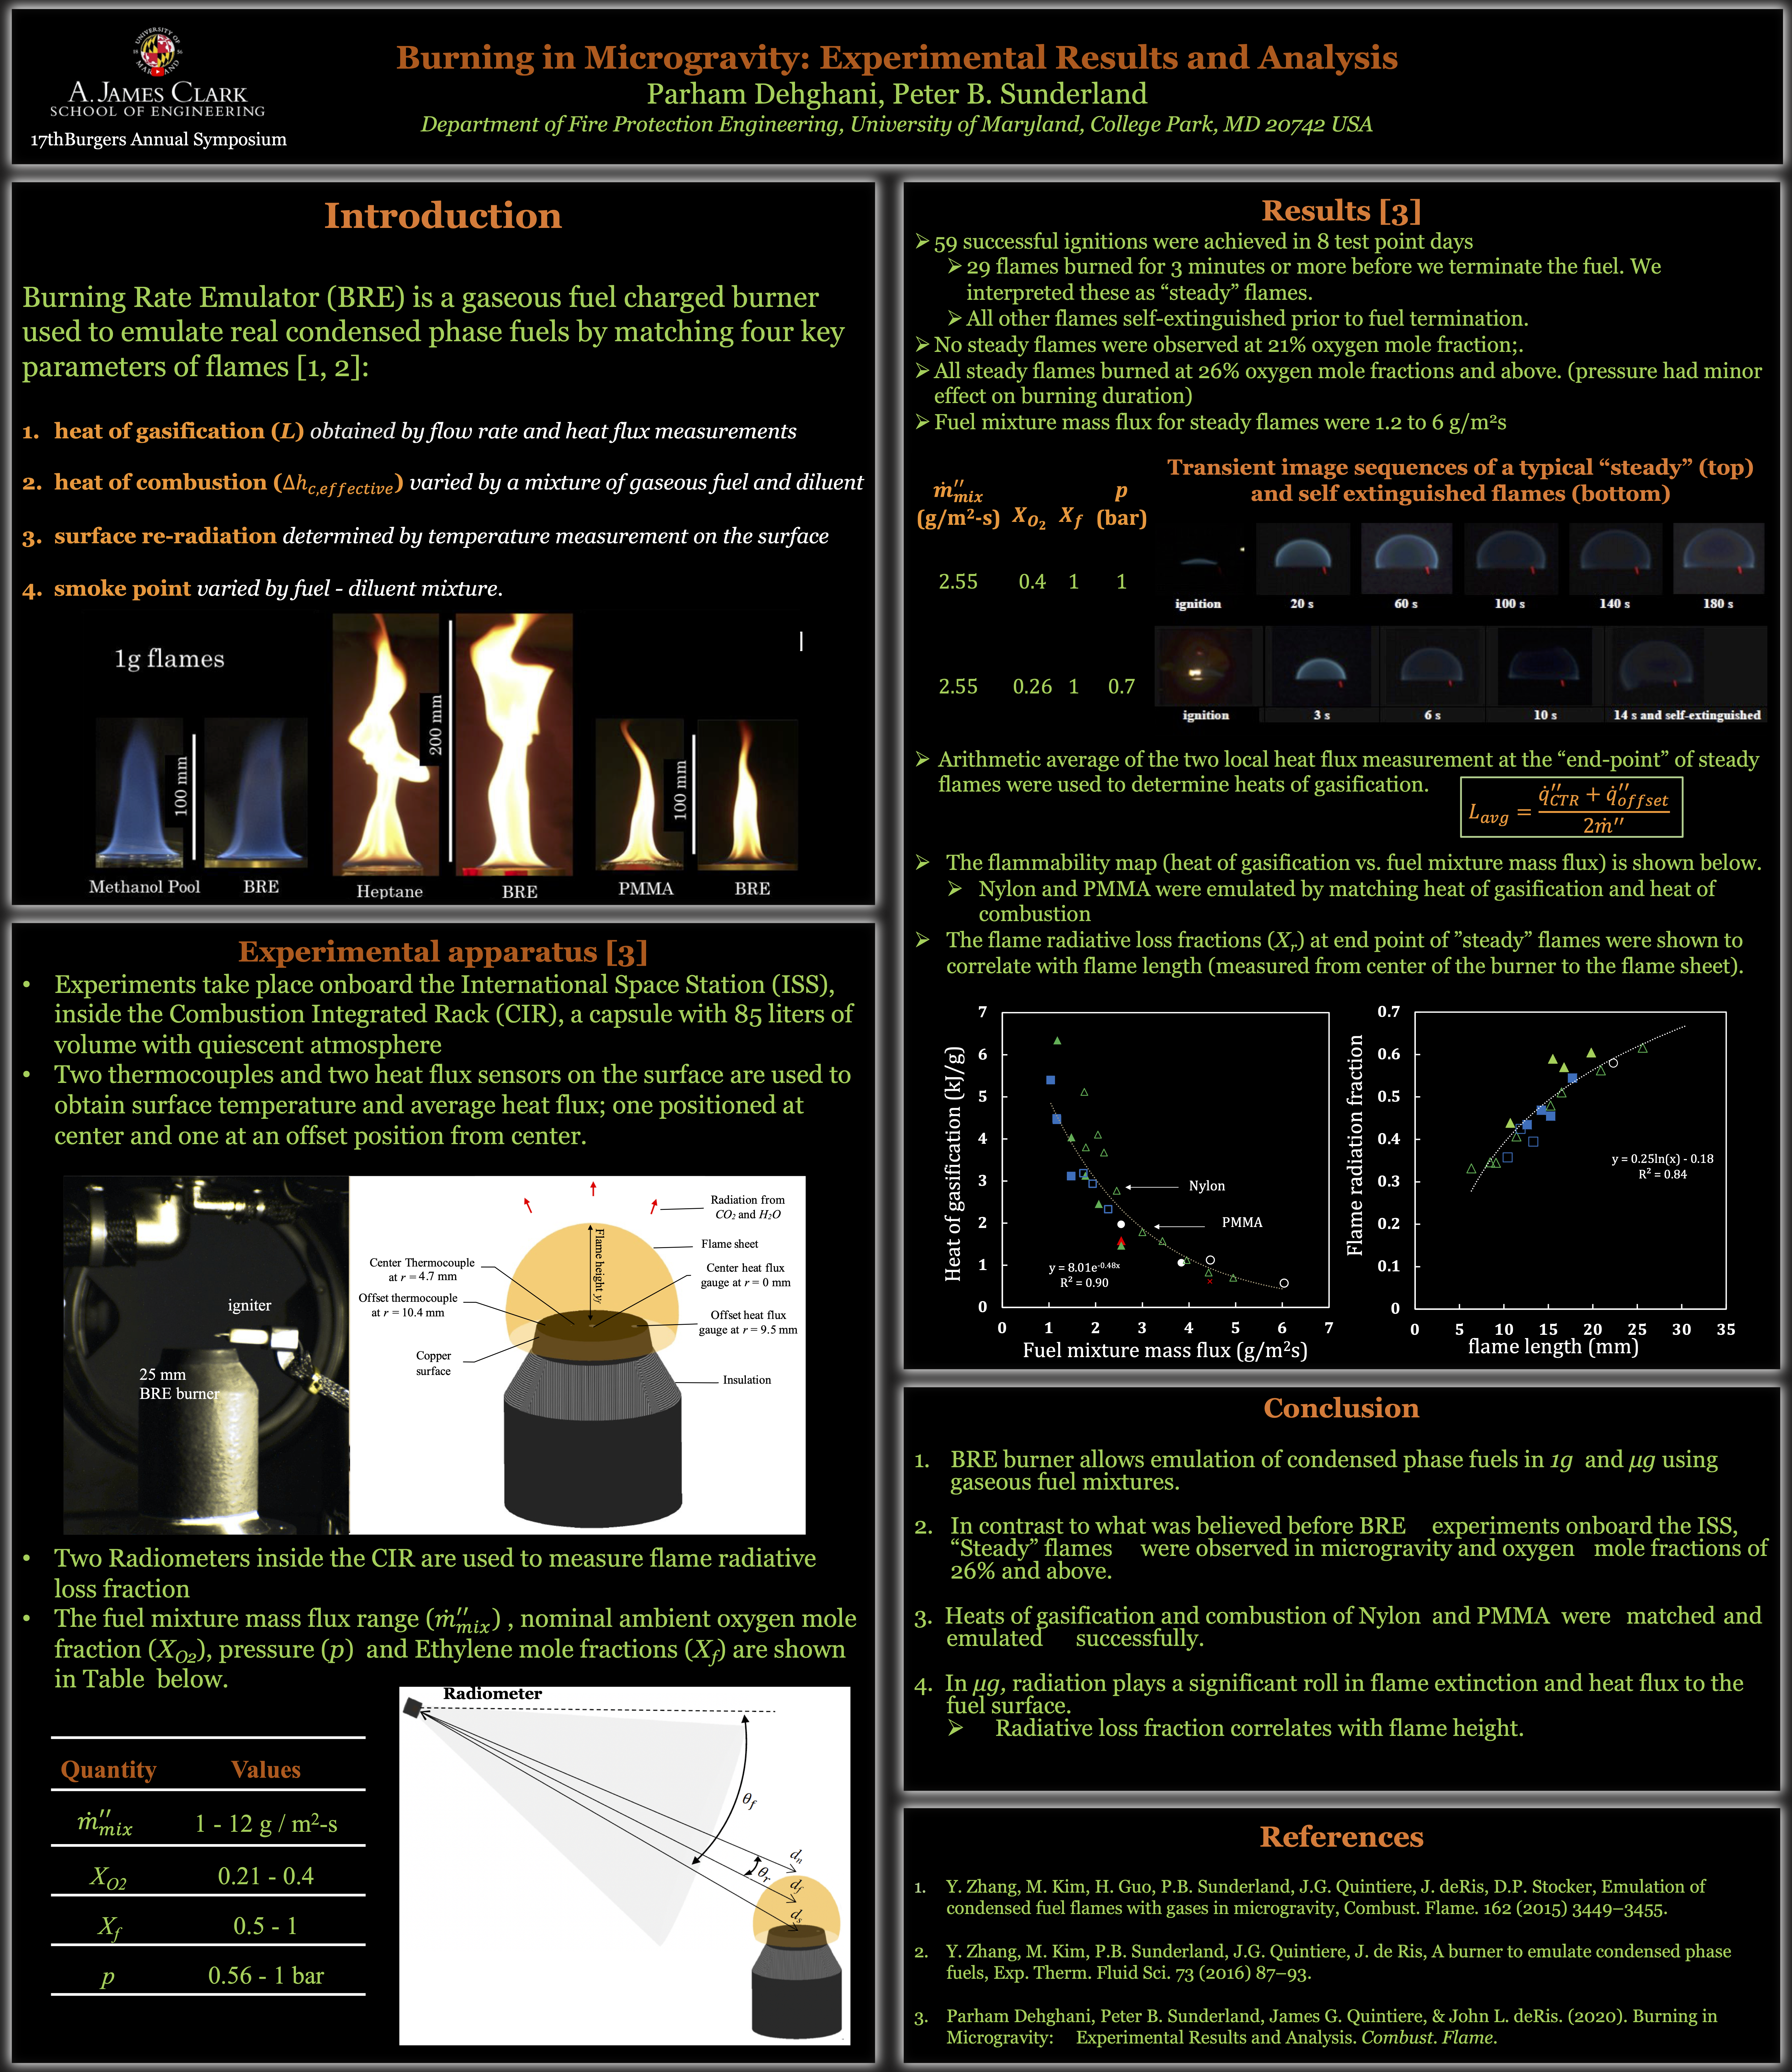 Burning in Microgravity: Experimental Results and Analysis